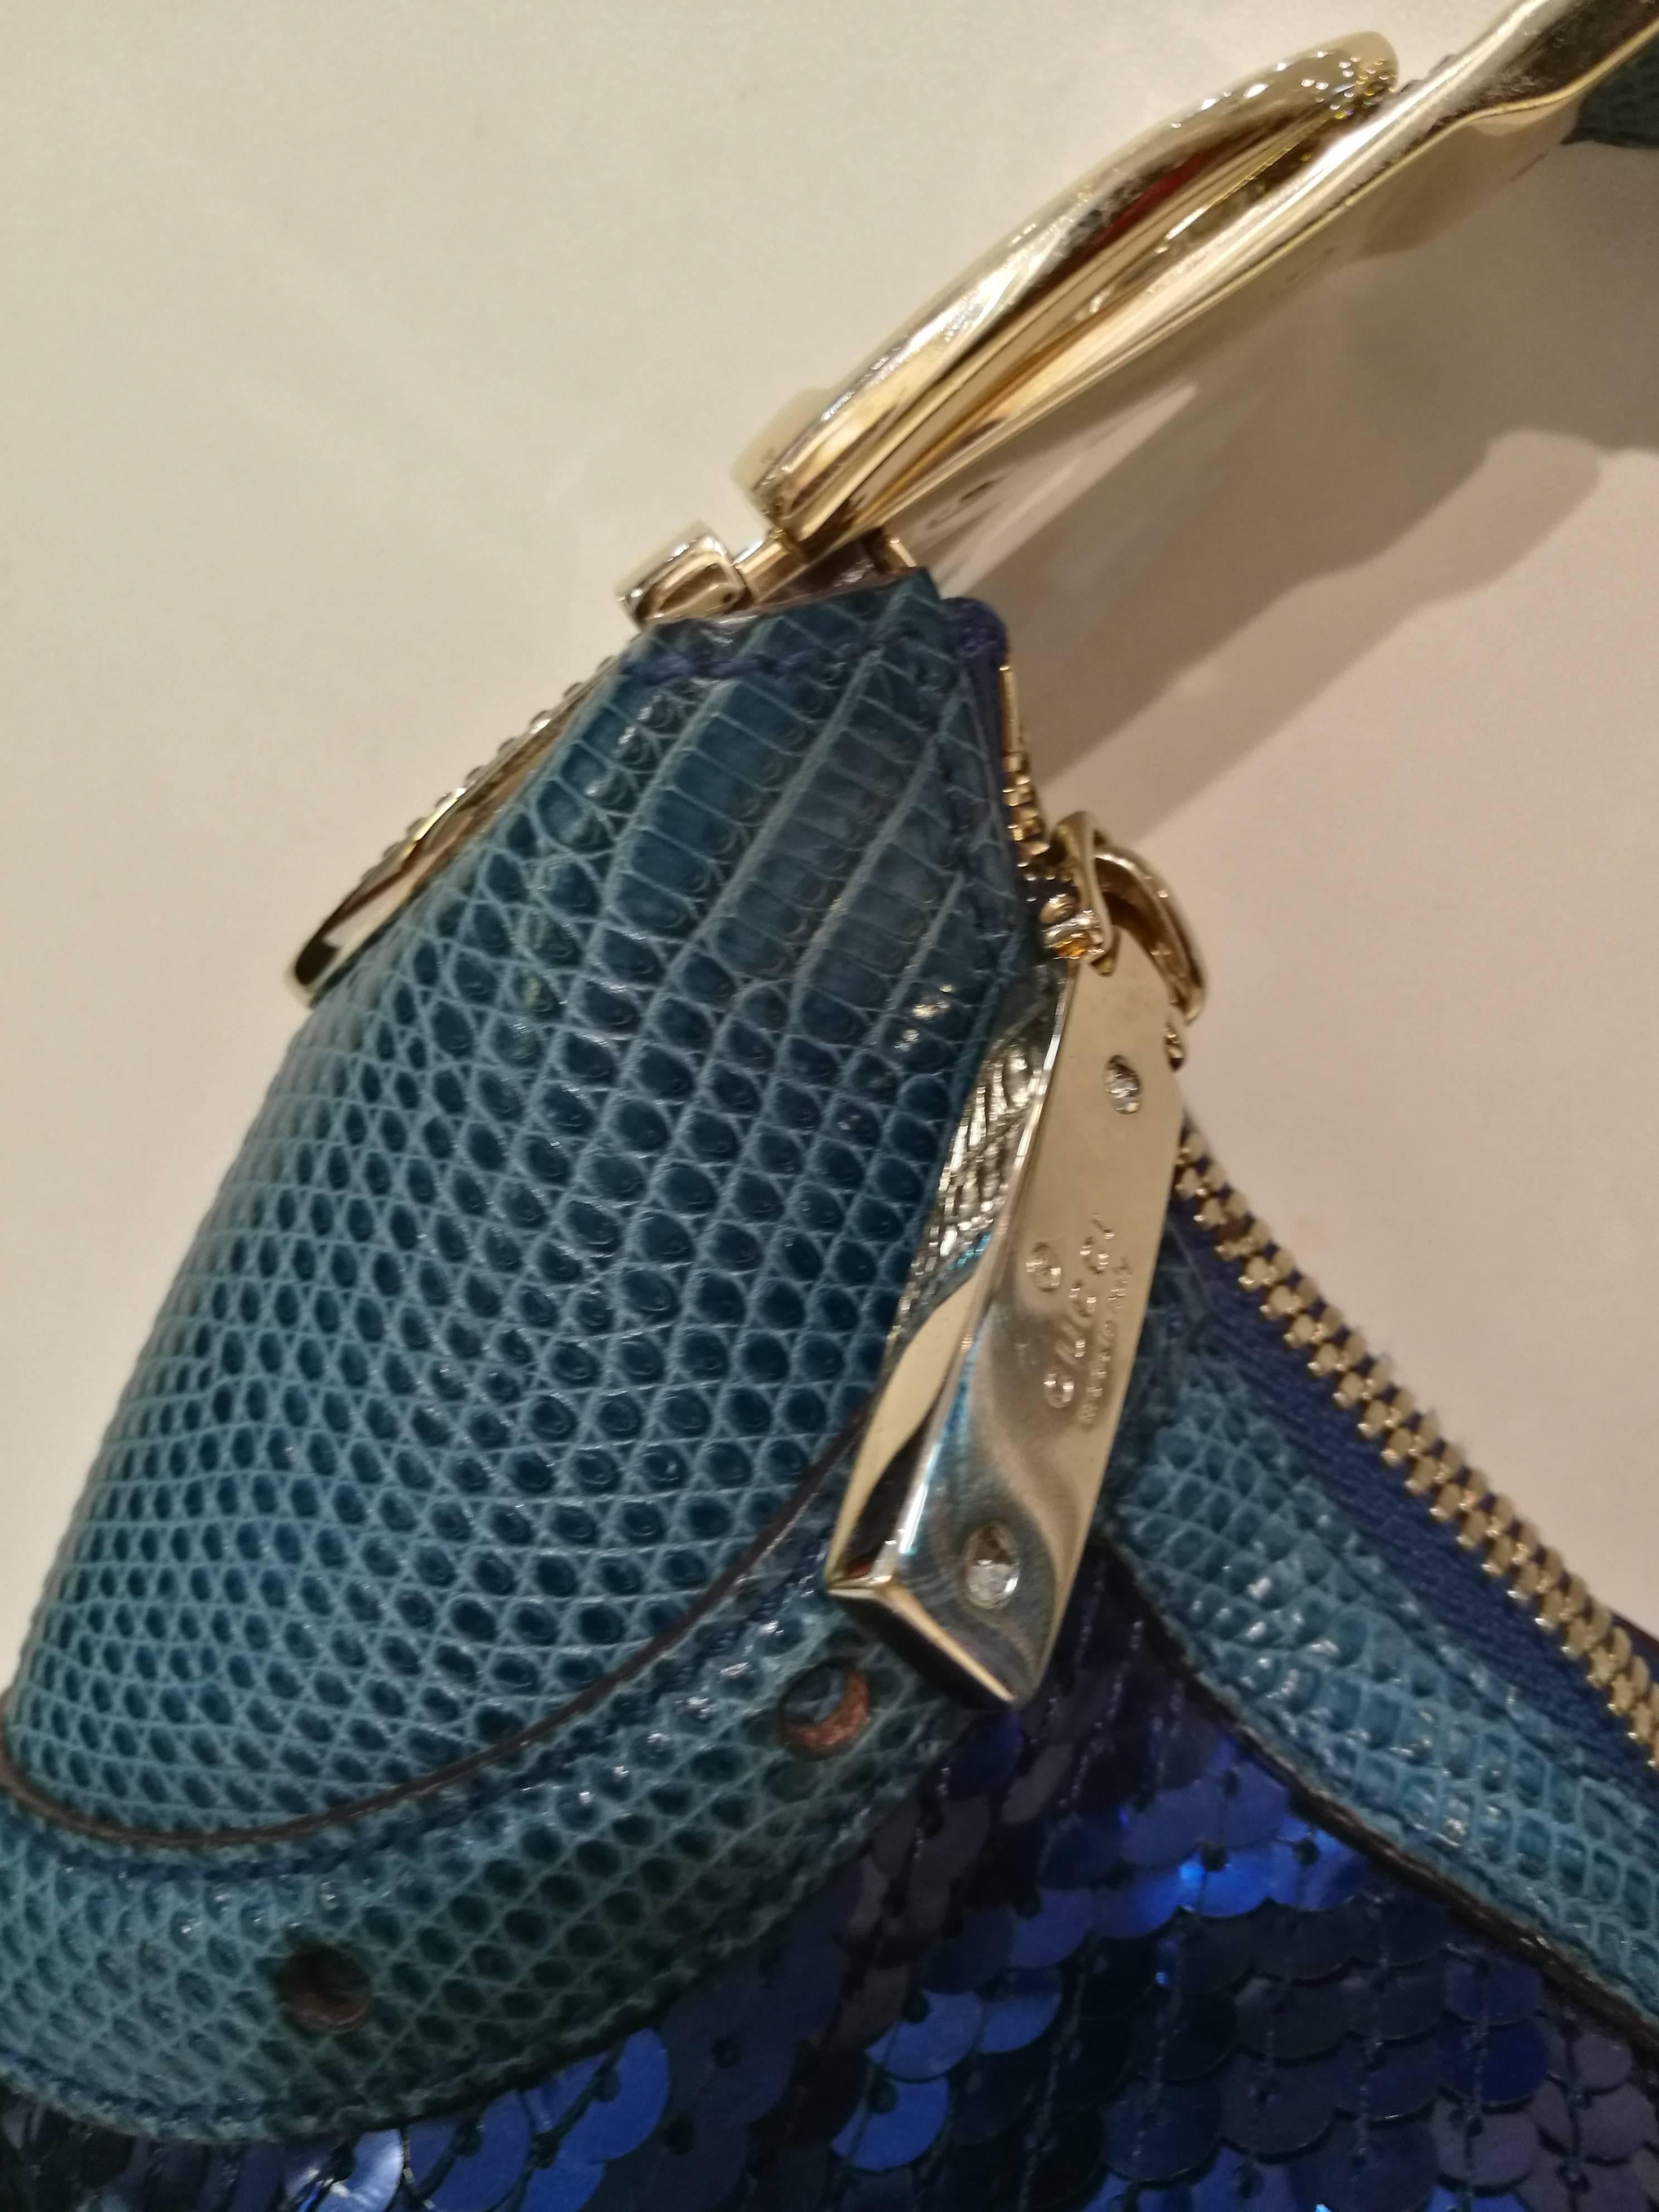 2000s Gucci Glam lizard Bag
Gucci lizard skin and blue sequin evening clutch handbag.   Features gold-tone hardware, blue lizard skin accents and trim, a single lizard skin top handle with crystal buckle (4